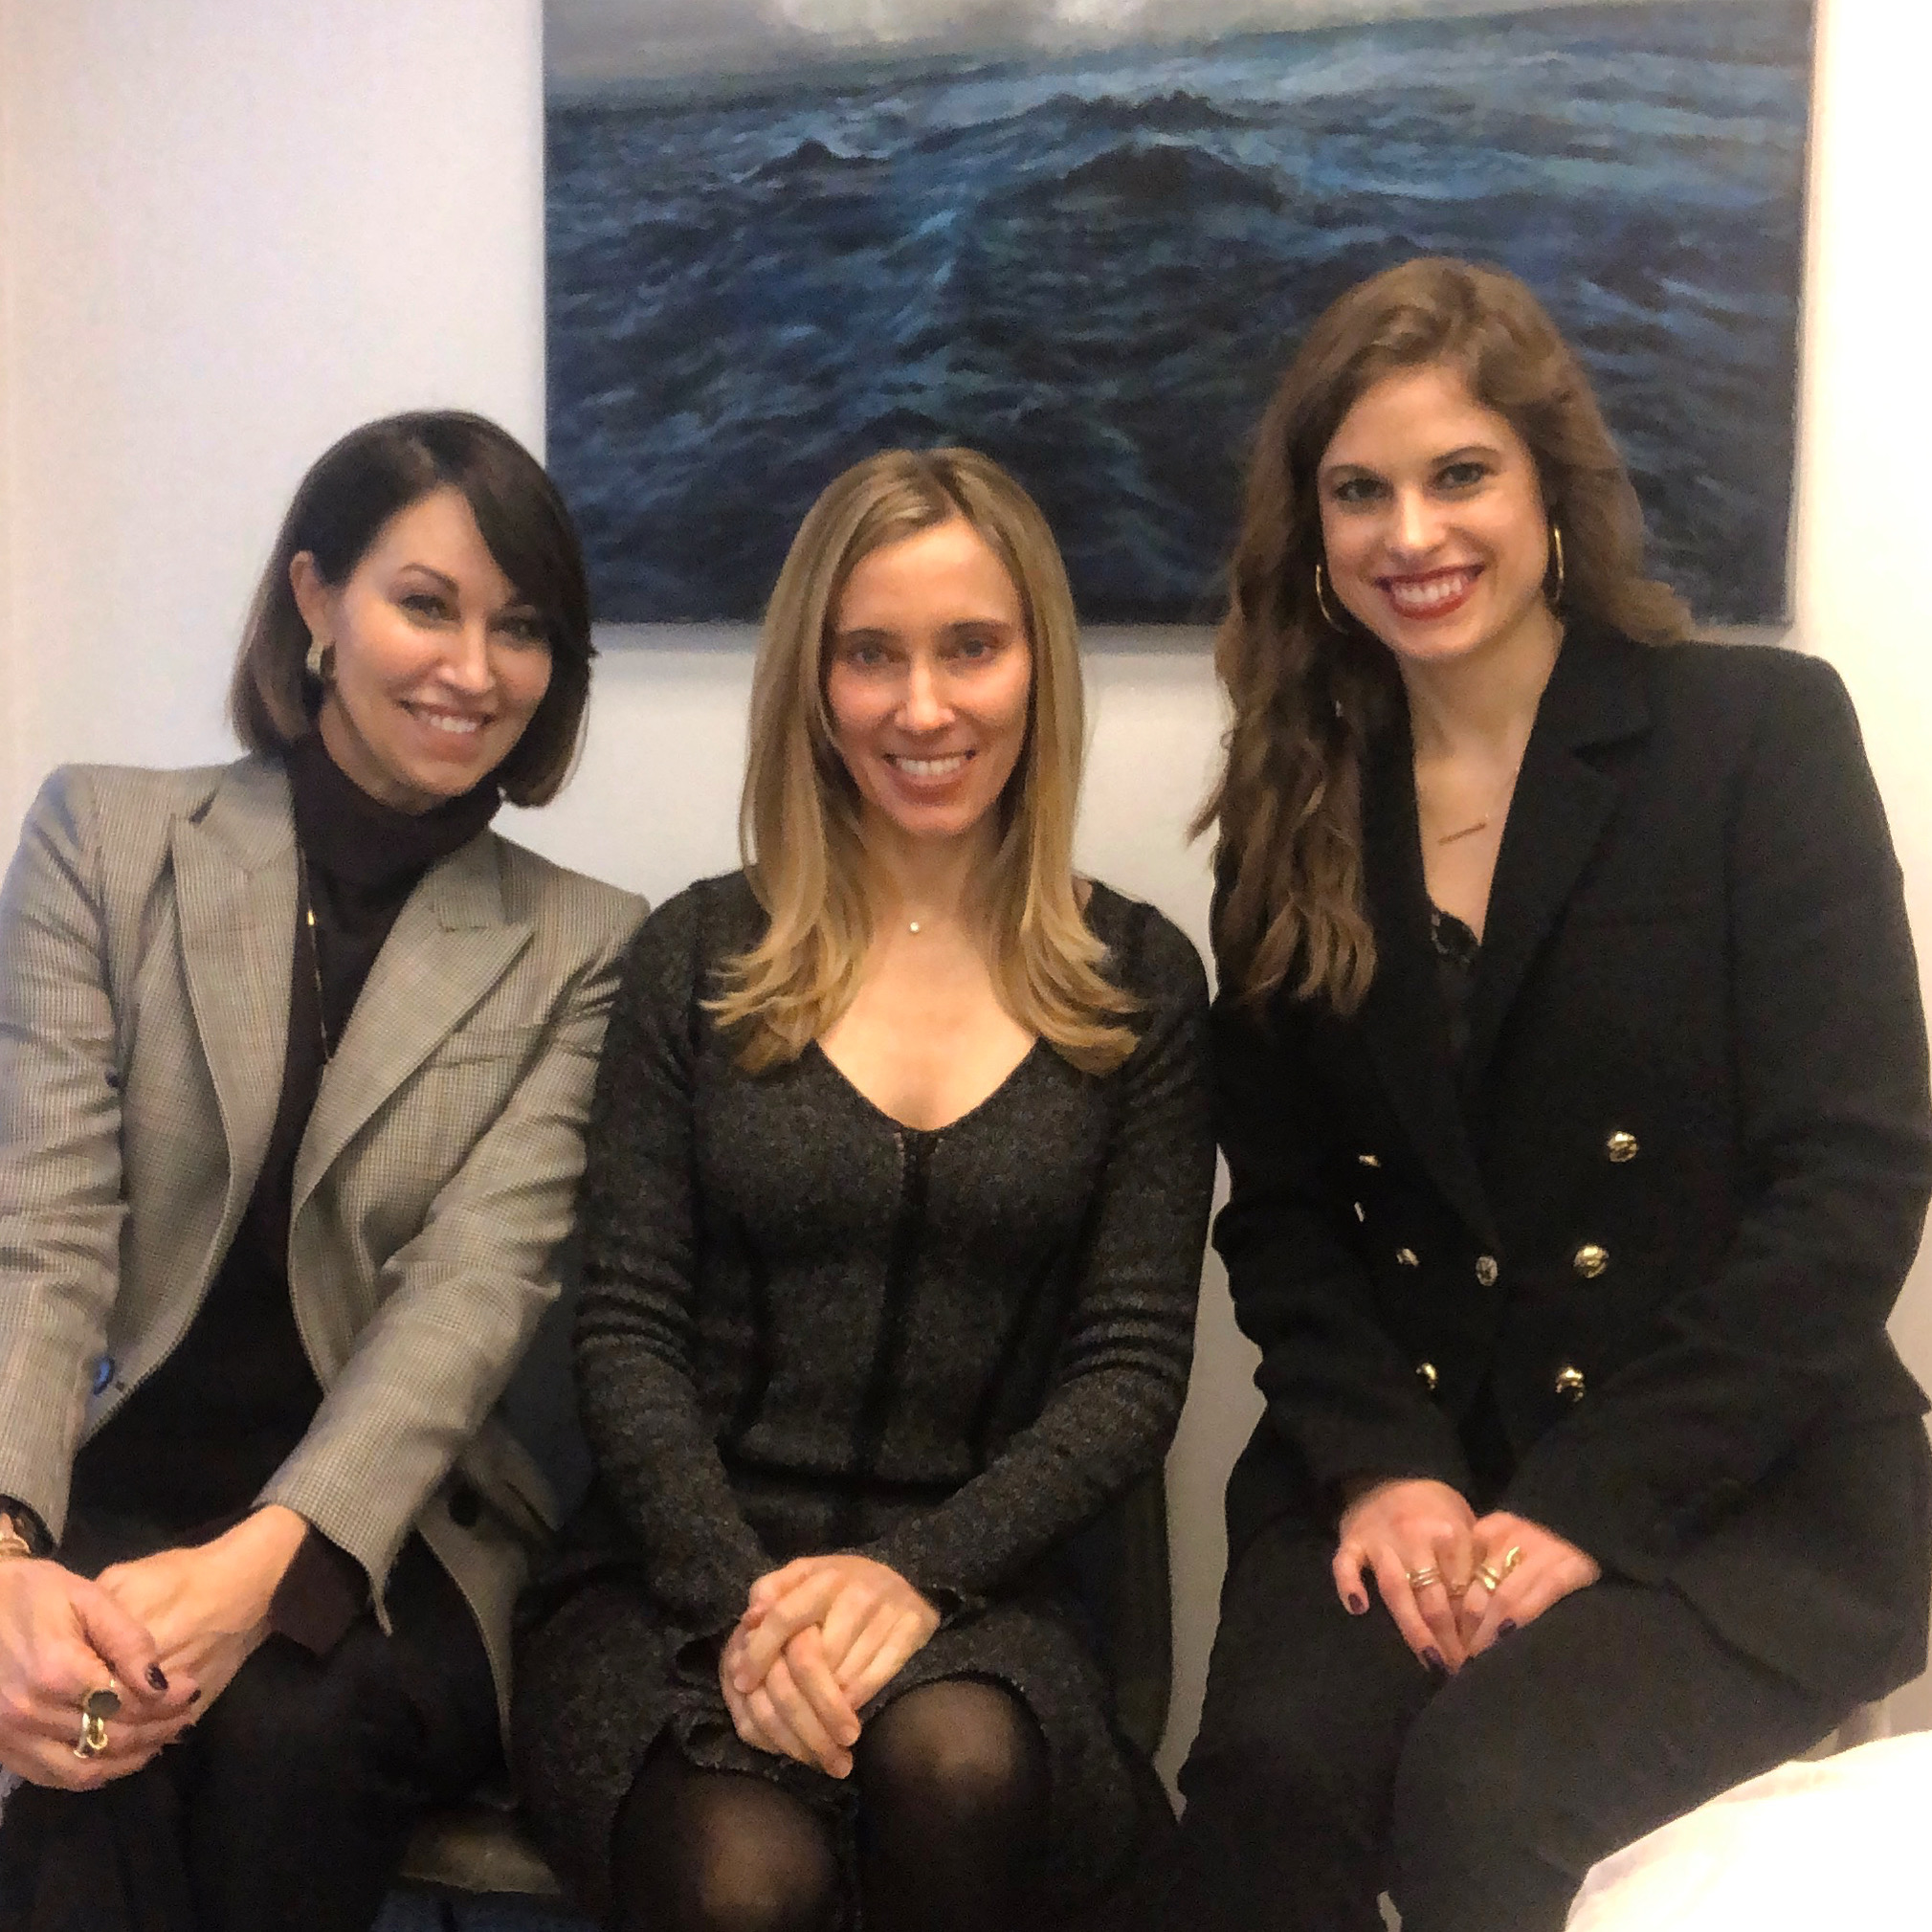 Three women: one wearing a plaid blazer & black turtleneck with brown hair, one blonde wearing a grey dress and one curly brunette wearing a black blazer